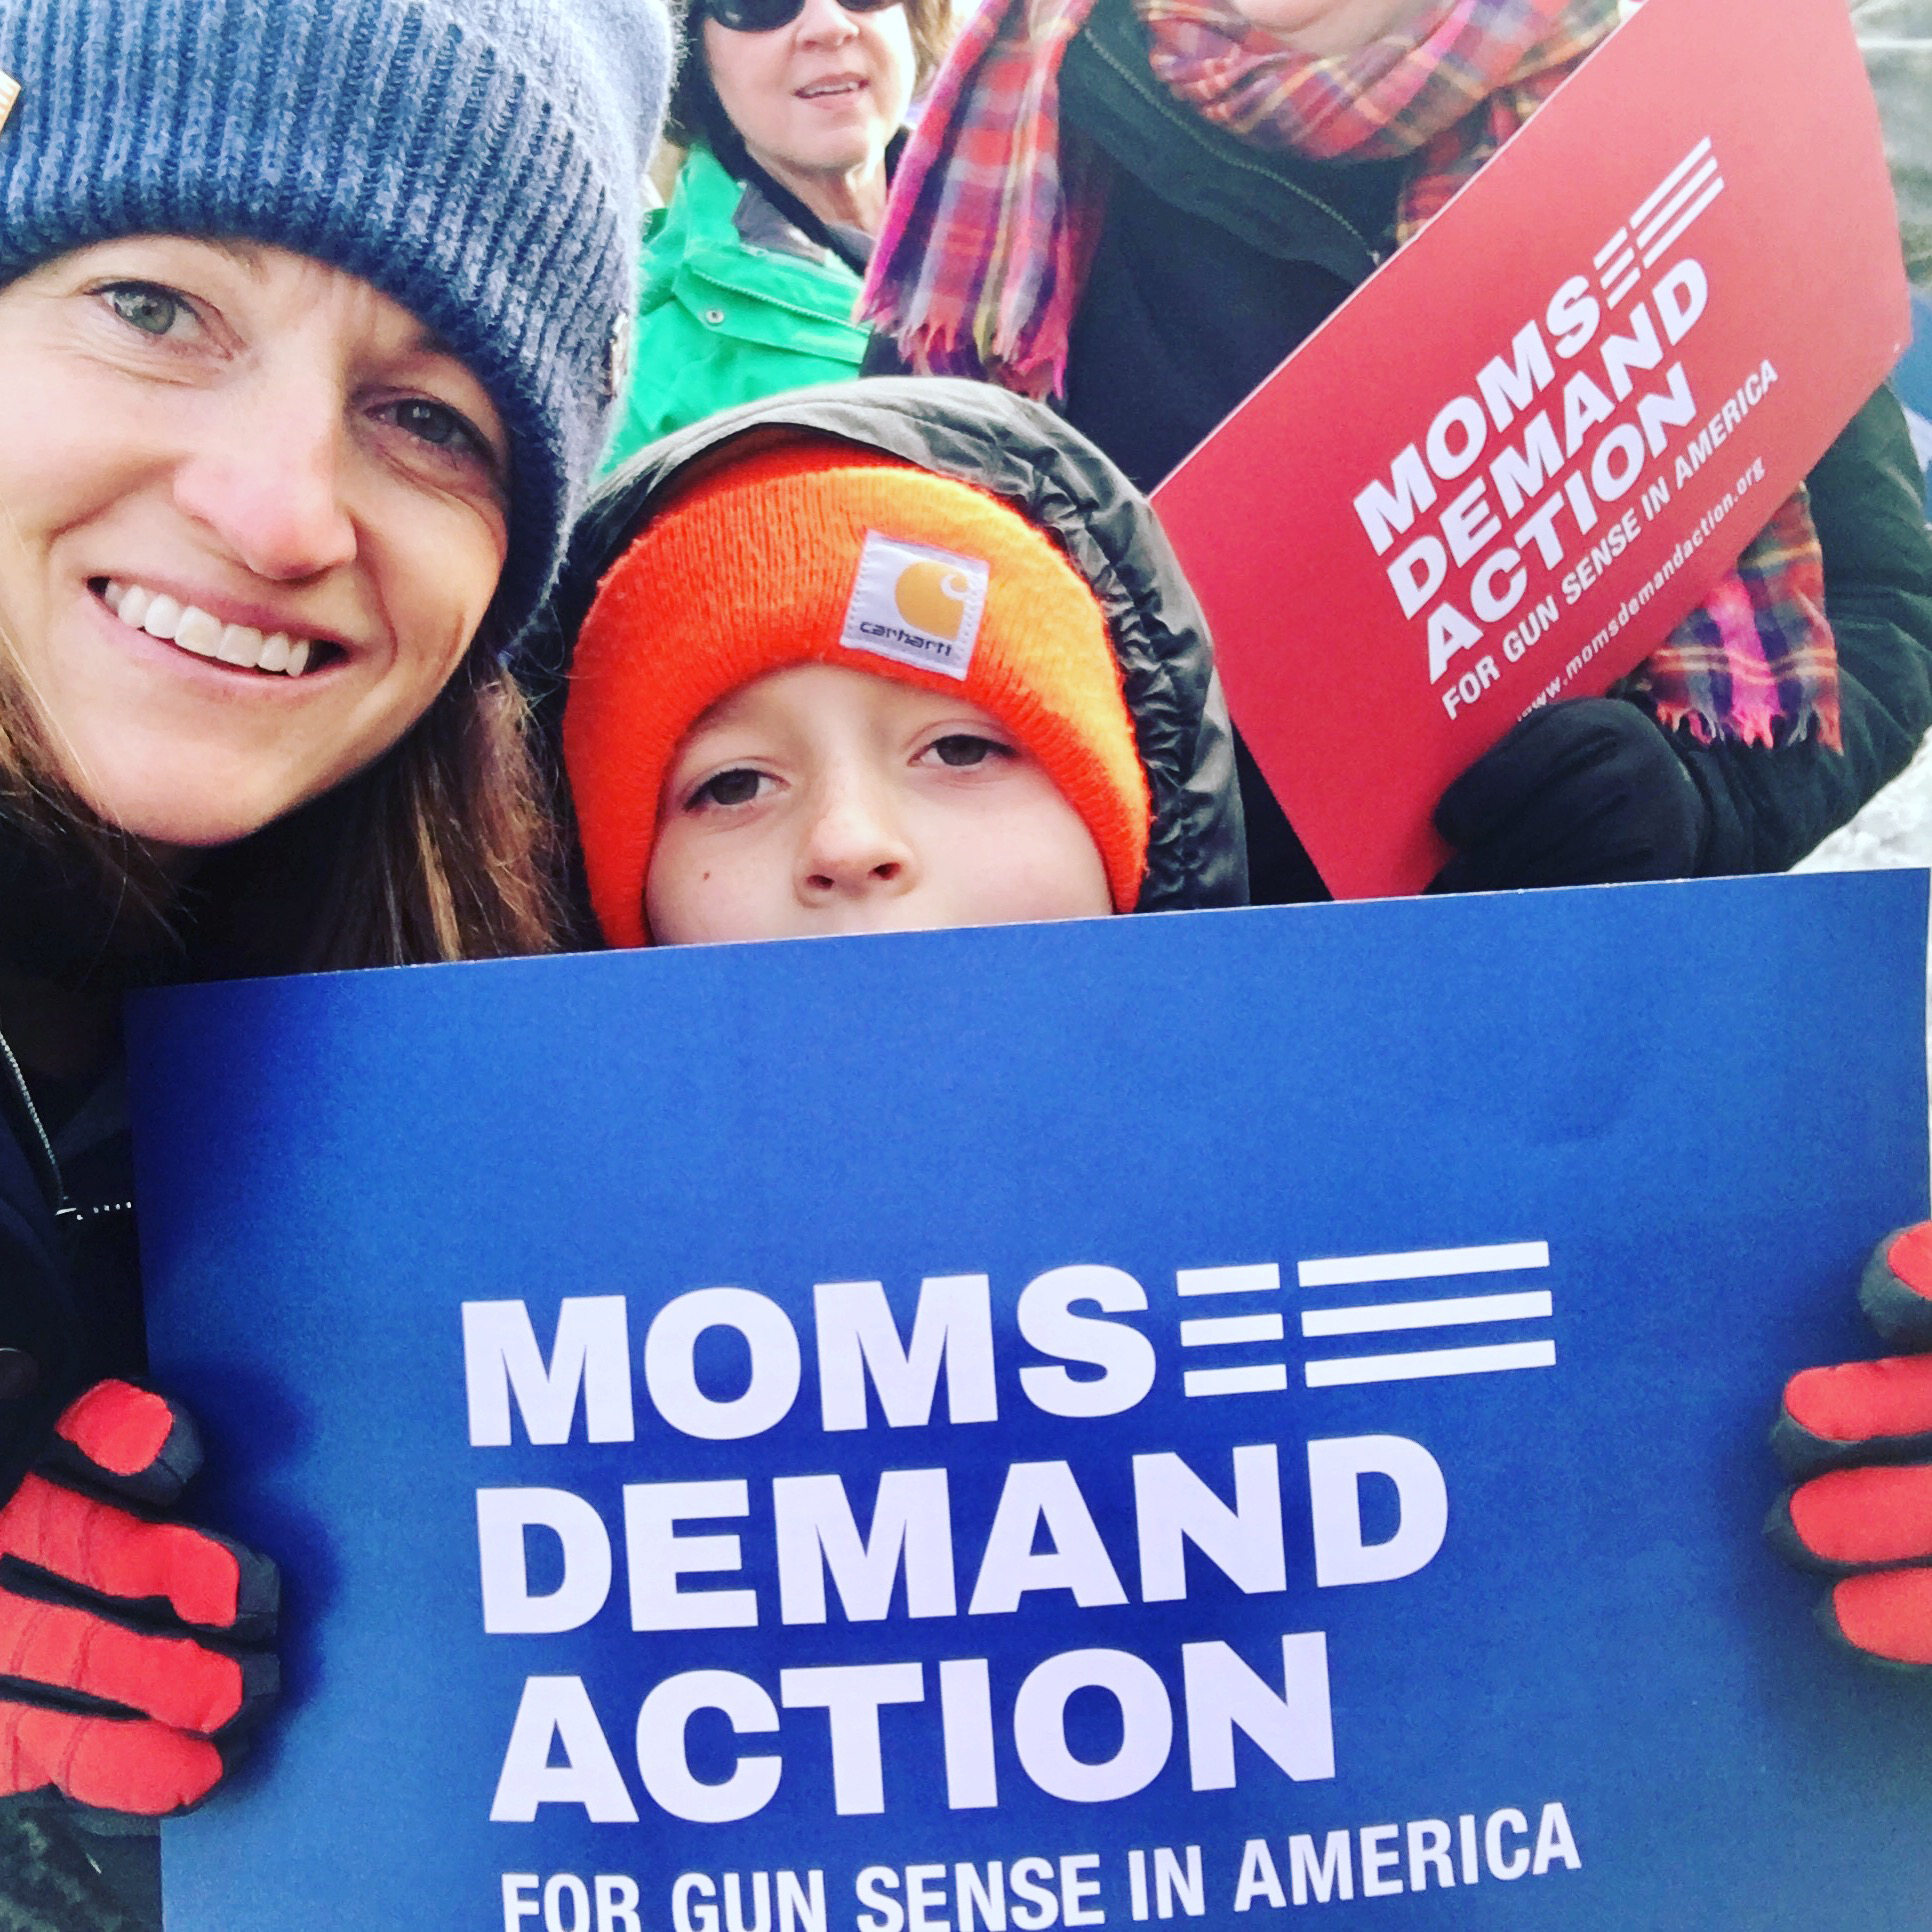 PHOTO: Nancy de Pastino started the Montana chapter of the gun control grassroots group Moms Demand Action. She brought her friends in one by one to join her effort. Here she is last January with her son.